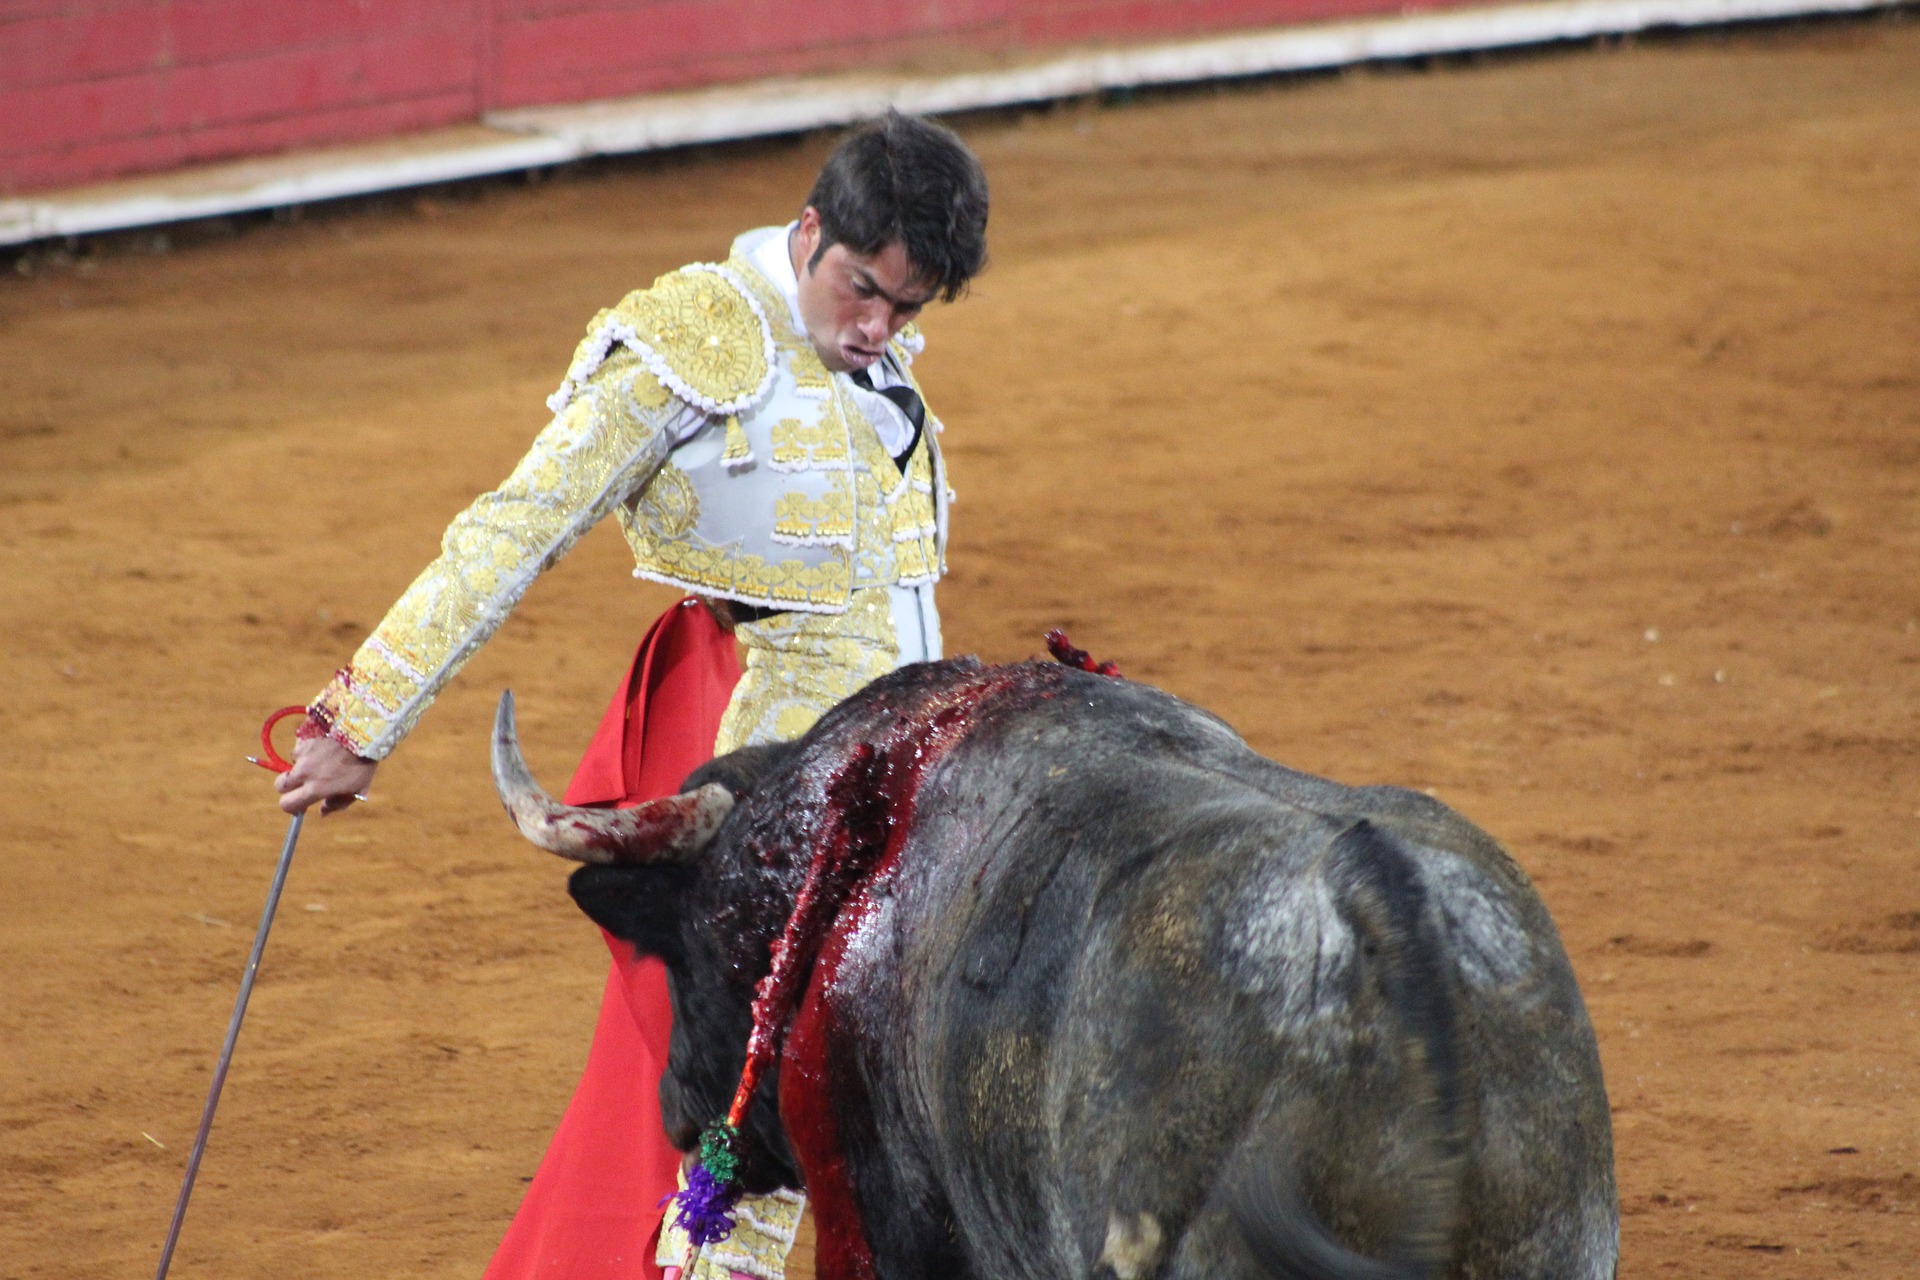 Like the Matador: Get Off The Line Of Attack